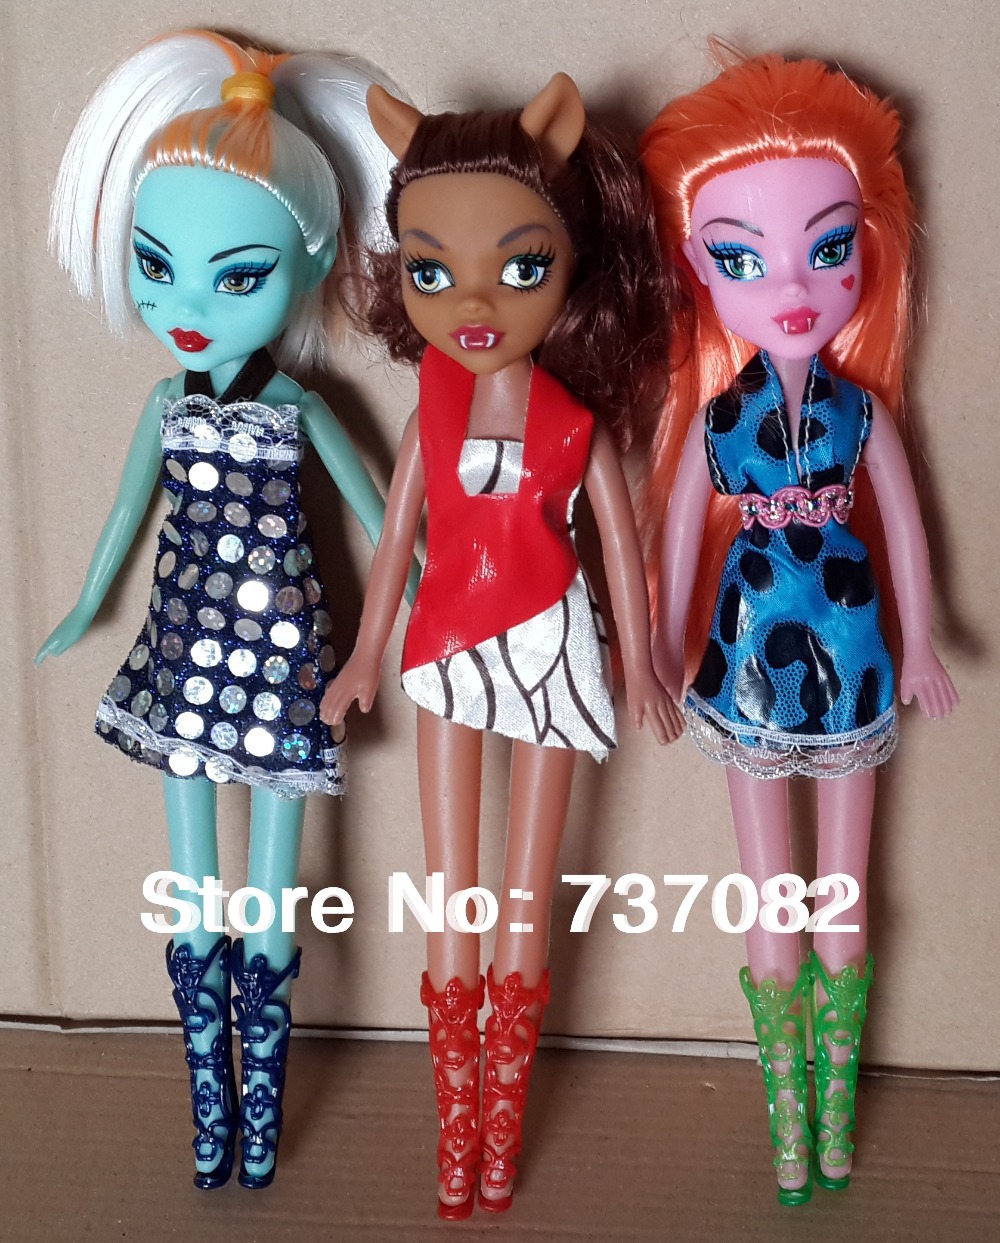 i00.i.aliimg.com/wsphoto/v0/1441509920_1/9-Monster-High-Configuration-Air-Body-Fashion-Clothing-And-Hairstyle-Variety-Multicolor-New-Product-Unique-Doll.jpg